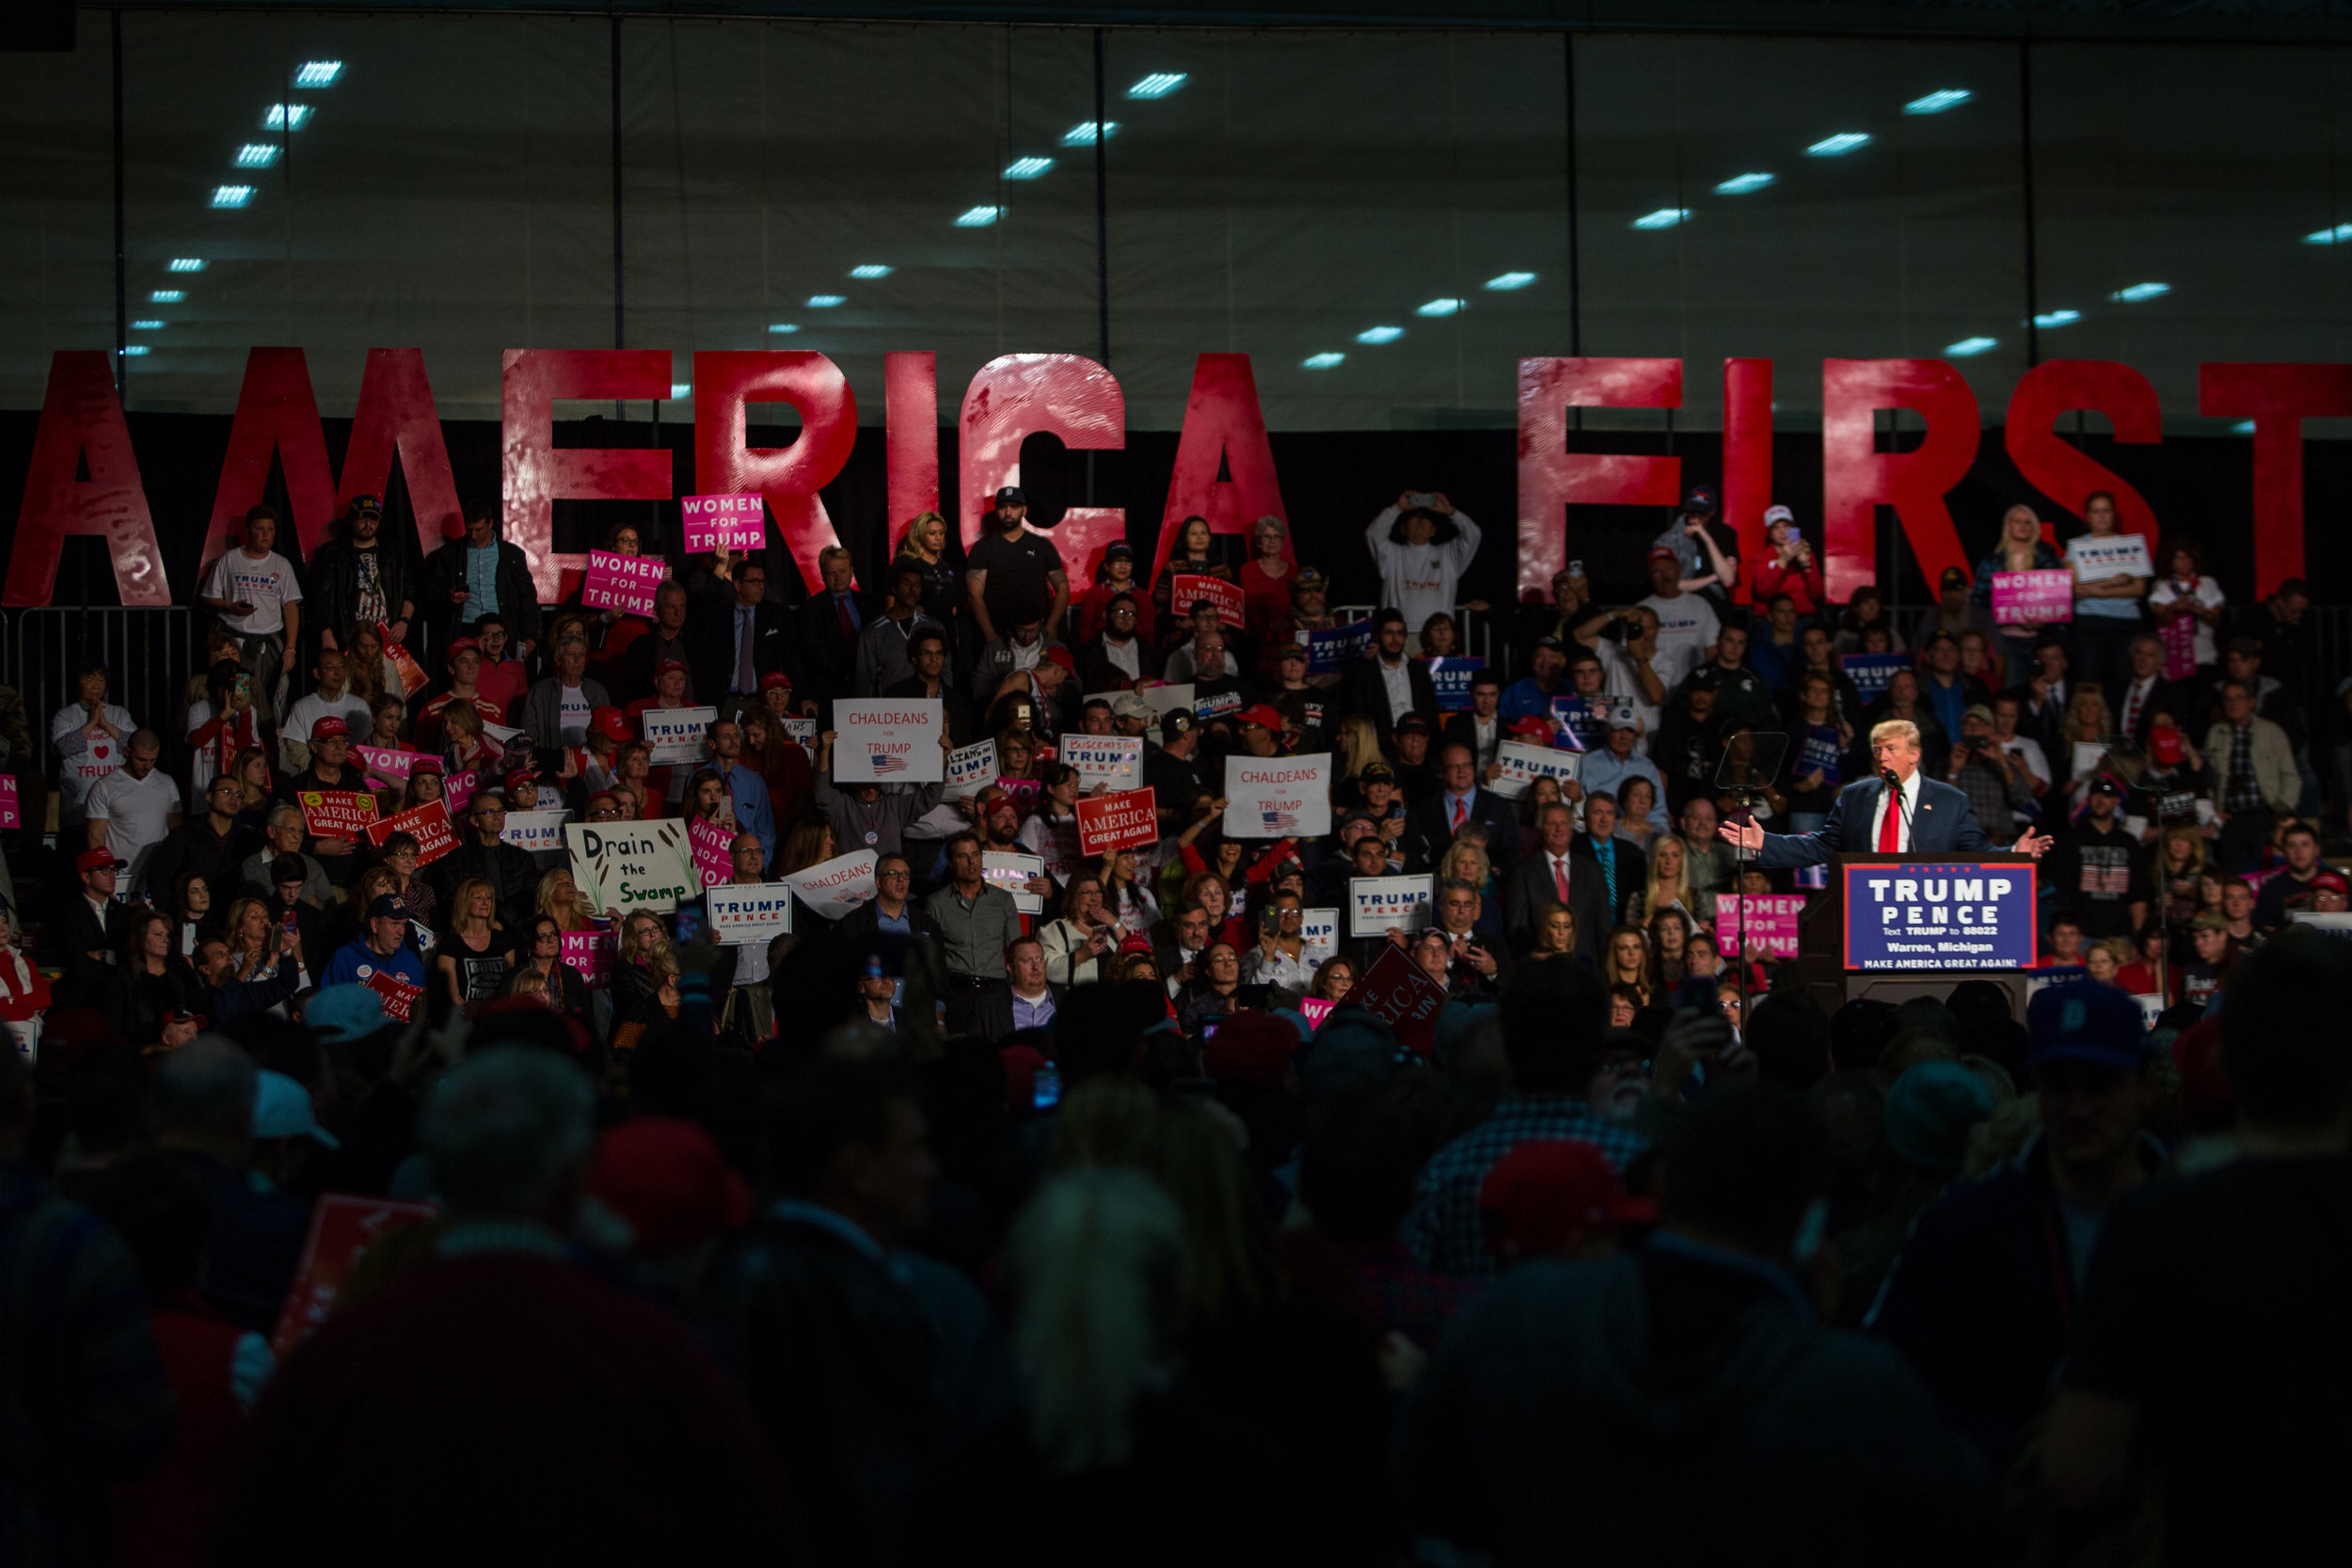  Republican presidential hopeful talks to a crowd of hundreds of supporters at Macomb Community College in Warren, MI on Monday, October 31, 2016. Trump previously spoke in Grand Rapids before his address in Warren.Matt Weigand | The Ann Arbor News 